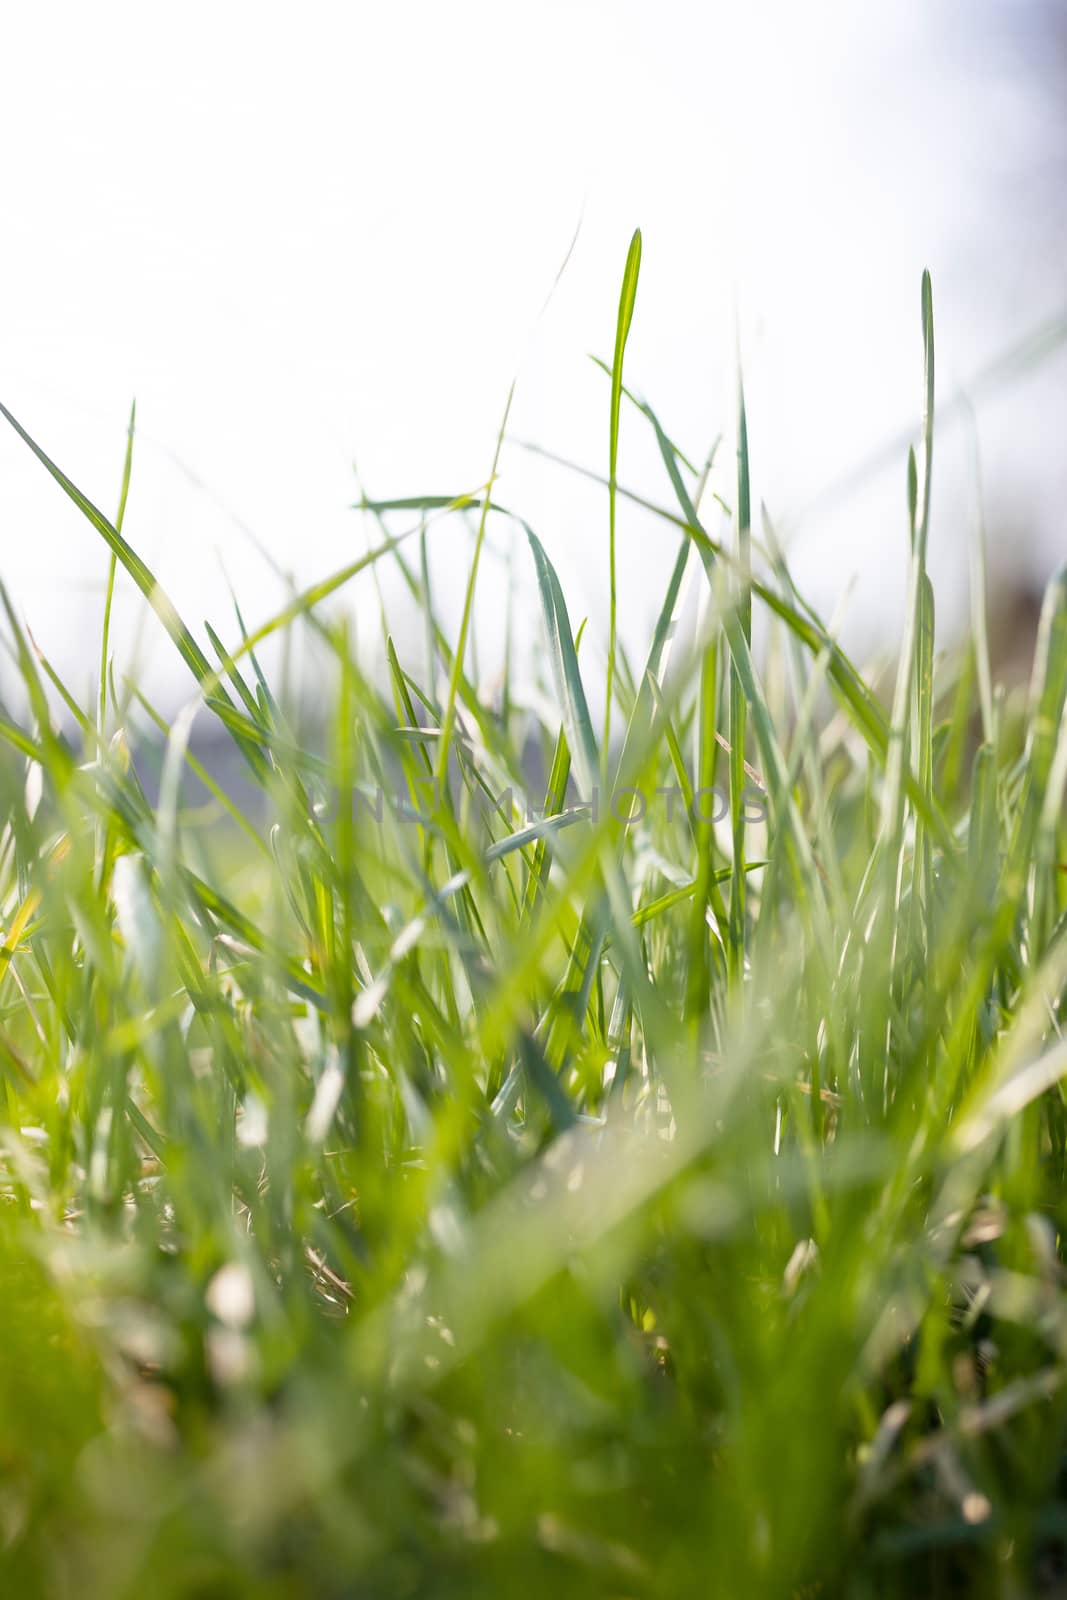 A green fresh grass on green blurred background. by alexsdriver